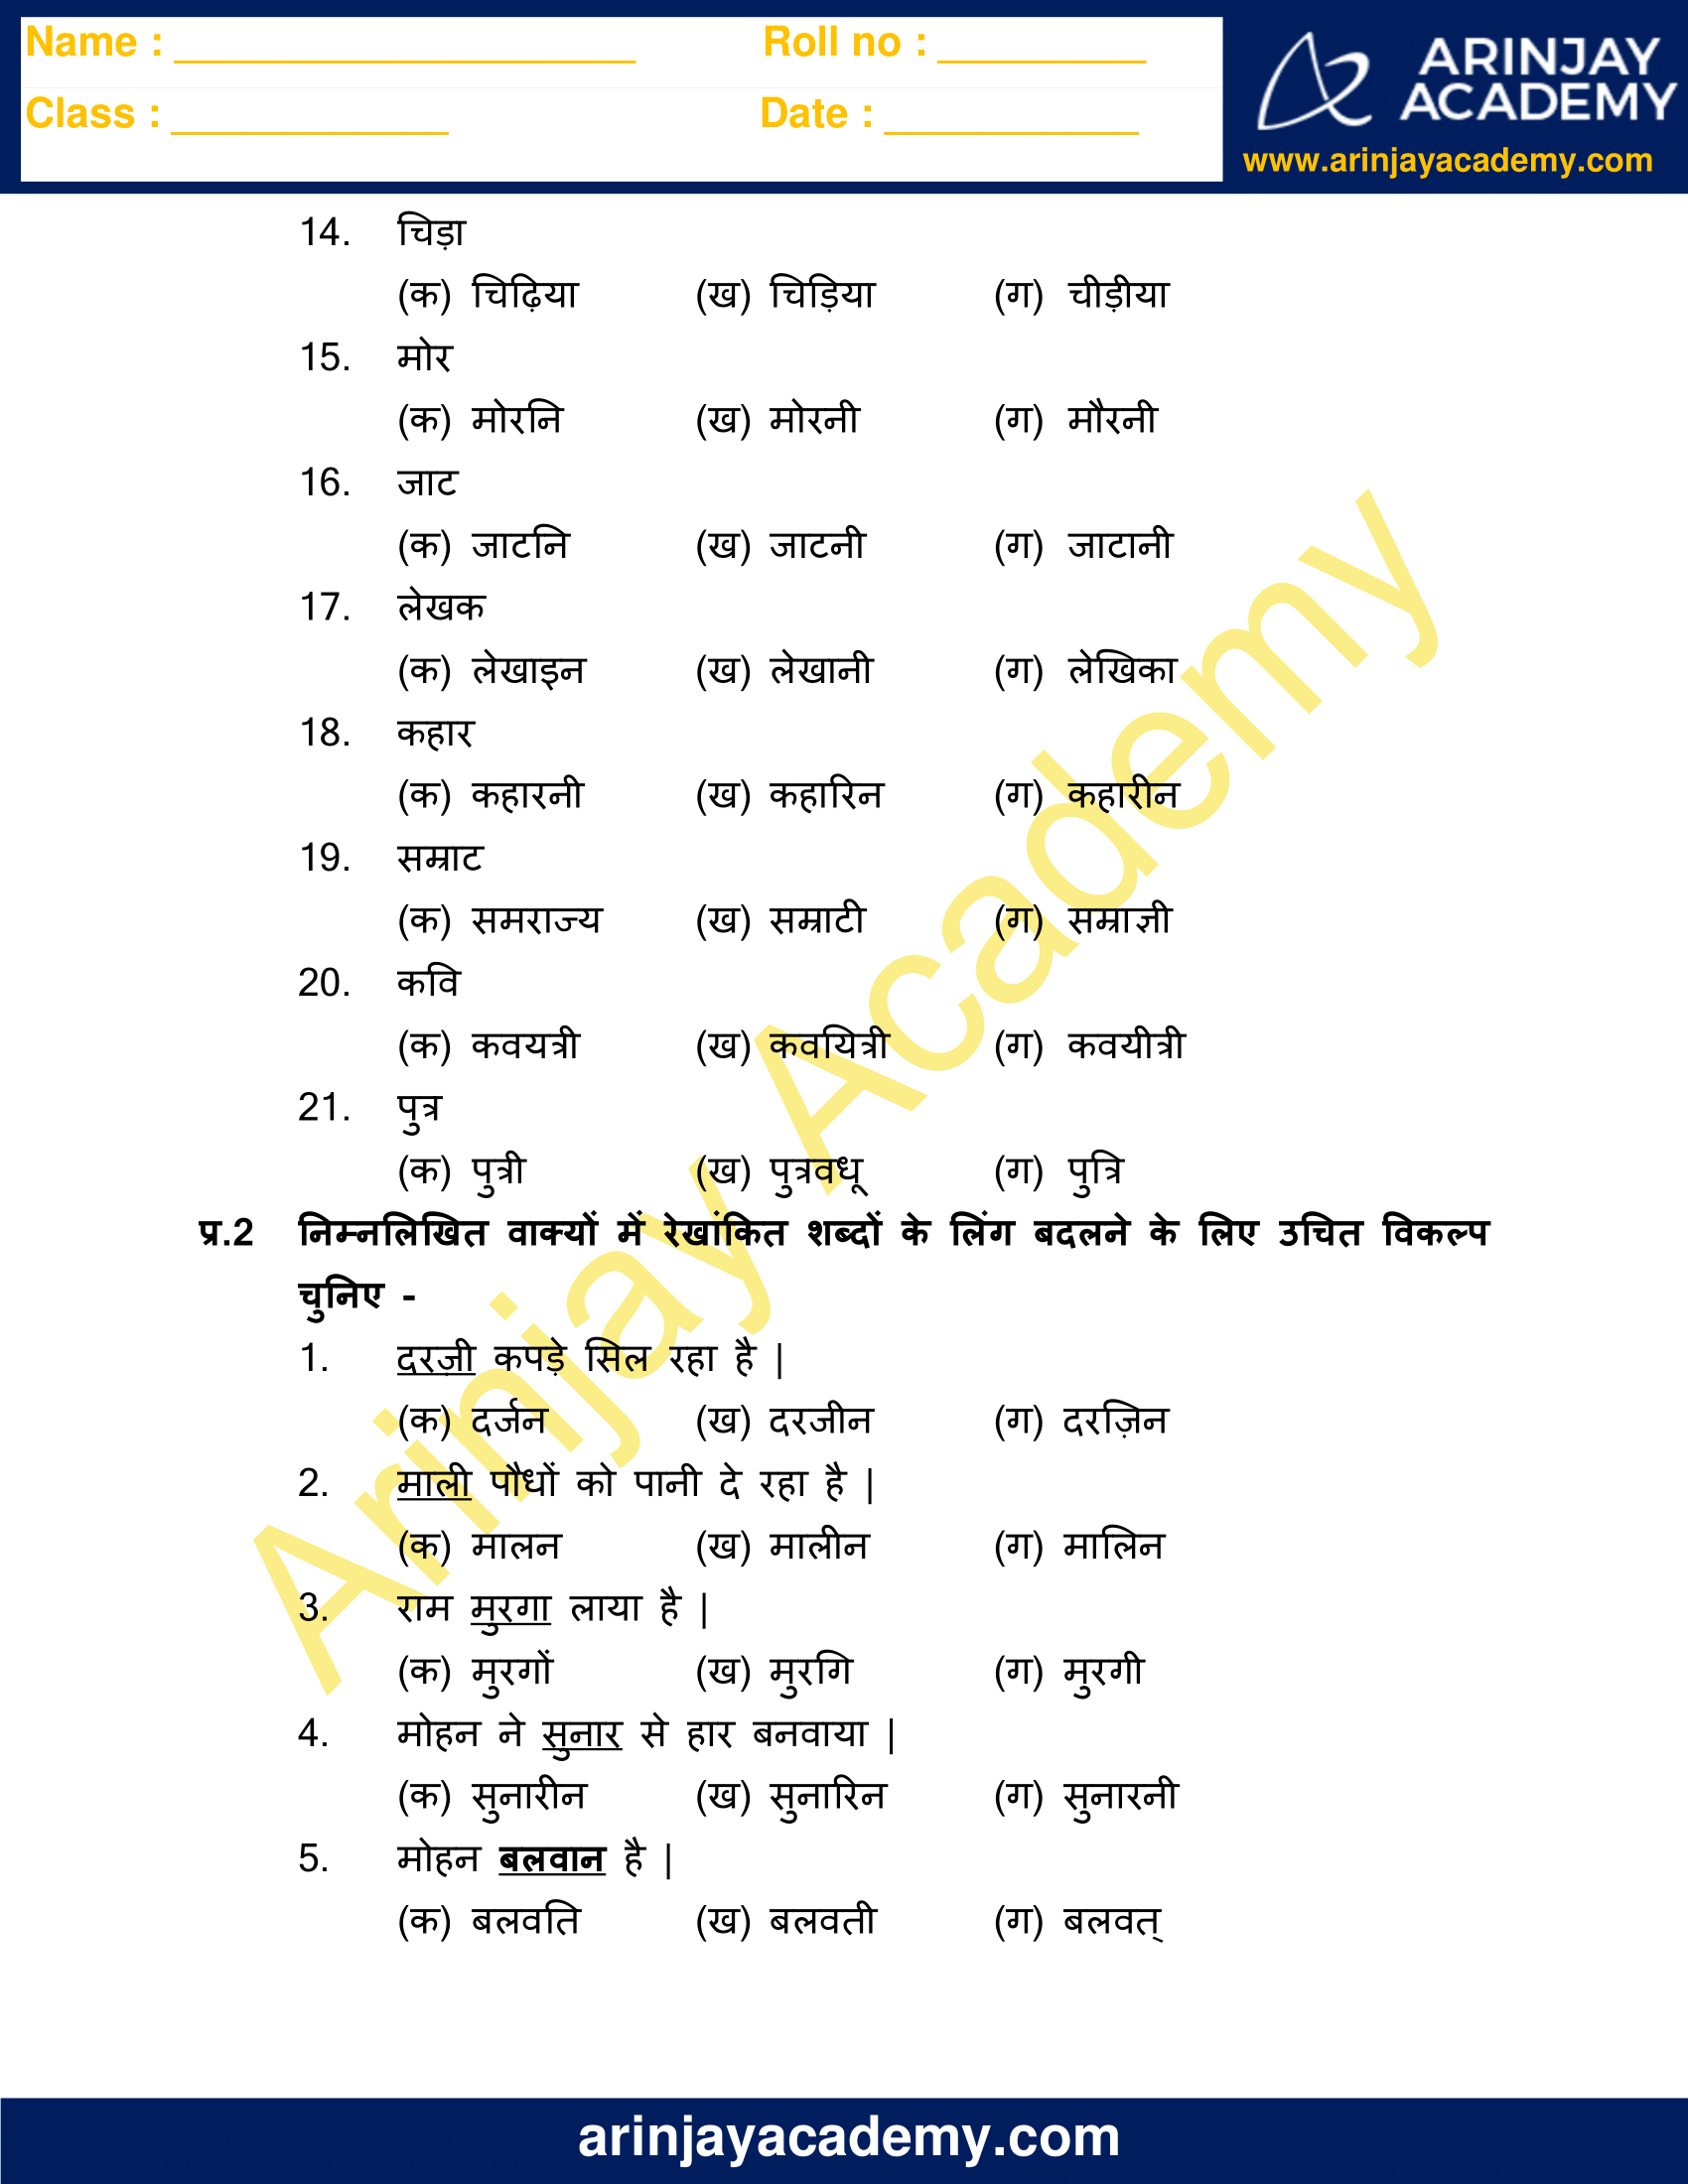 ling in hindi class 5 worksheet free and printable arinjay academy